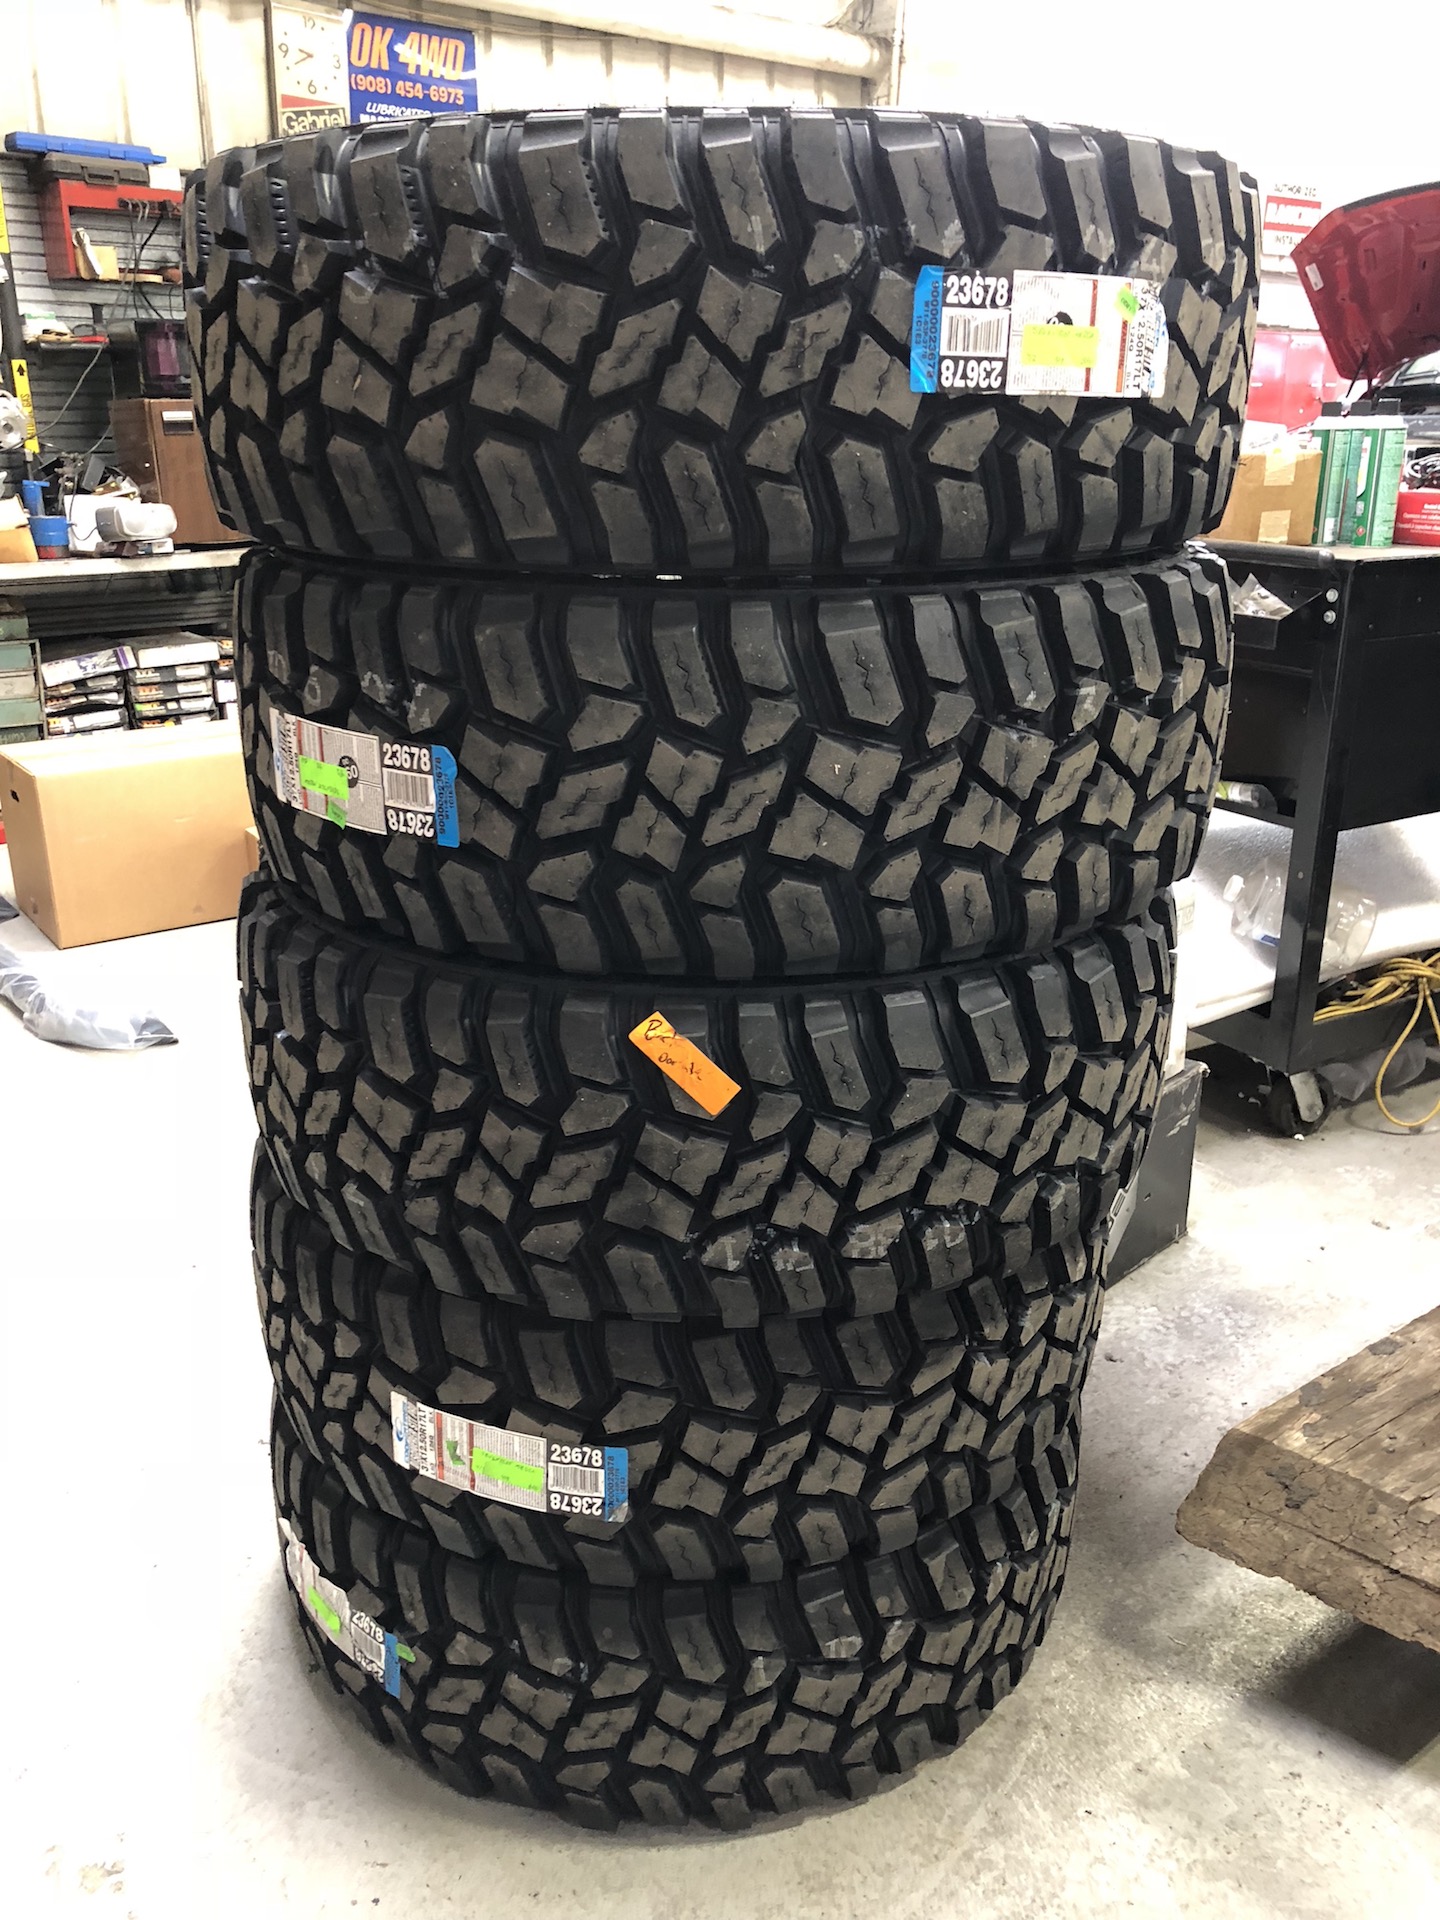 37-inch-cooper-stt-pro-tires-for-the-jl-jeepfan